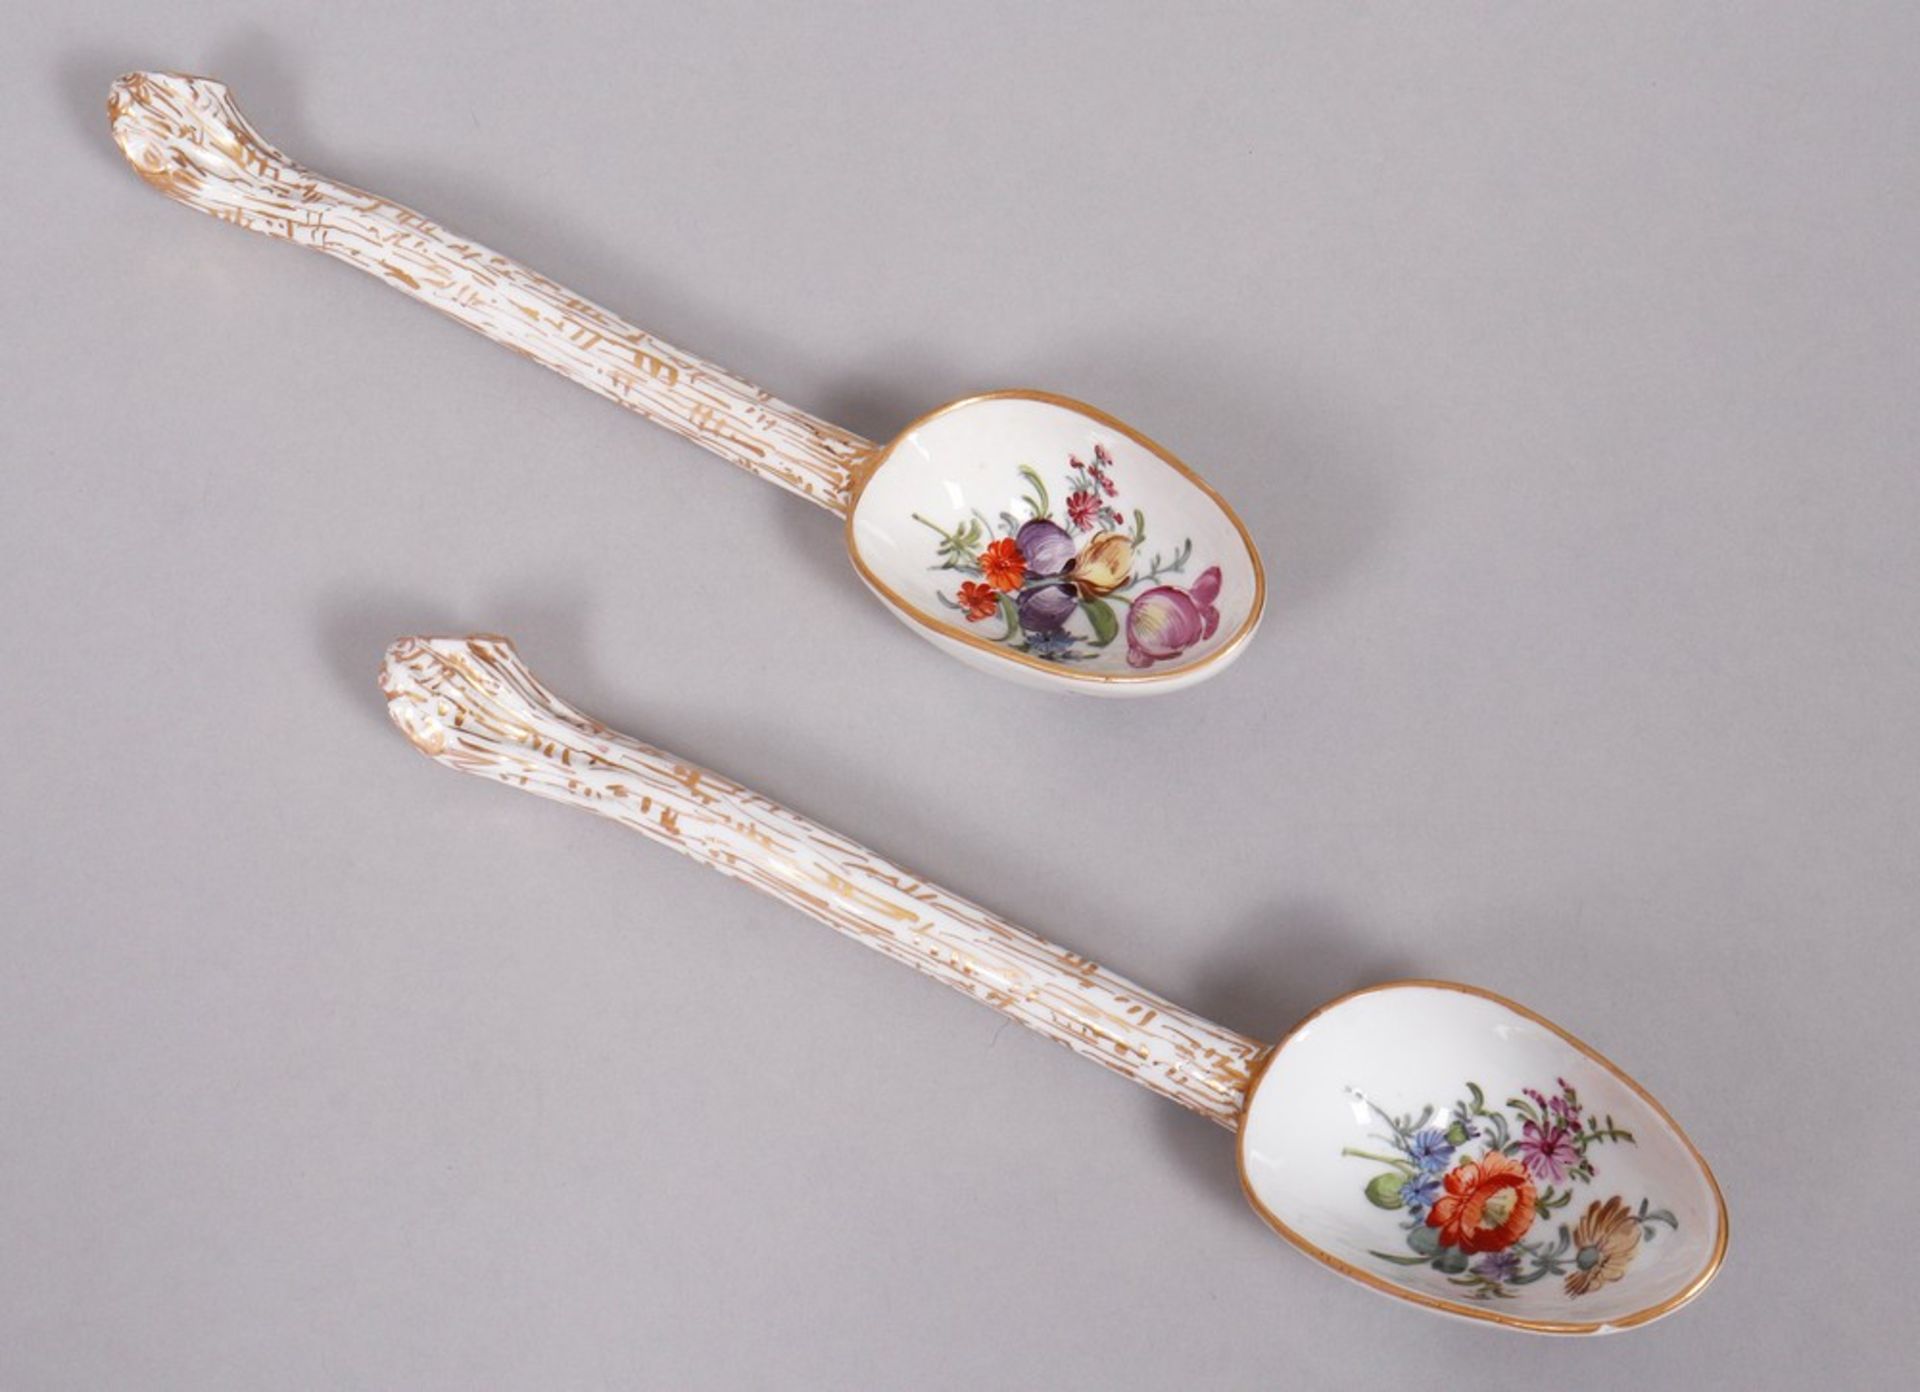 2 spoons, floral decoration, probably Meissen, 19th C.